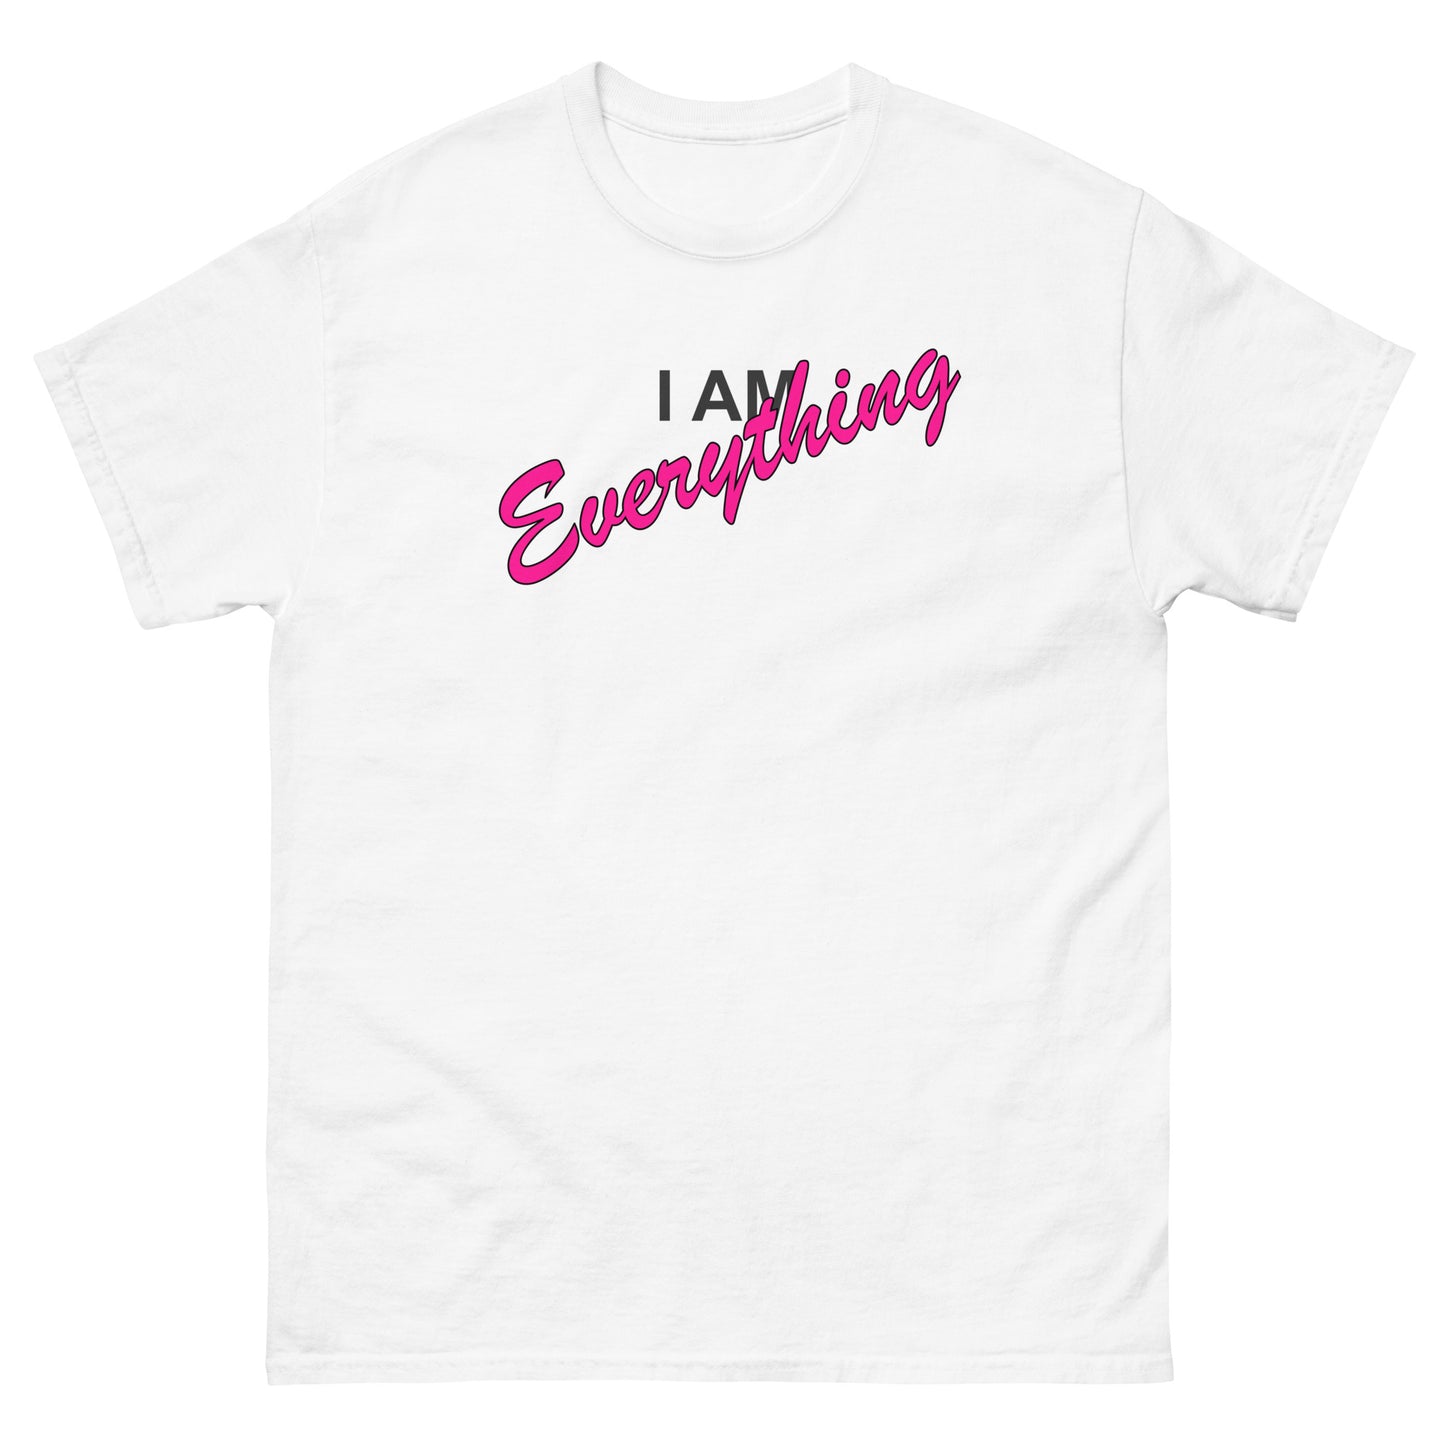 I AM EVERYTHING (black outlined letters) - Unisex